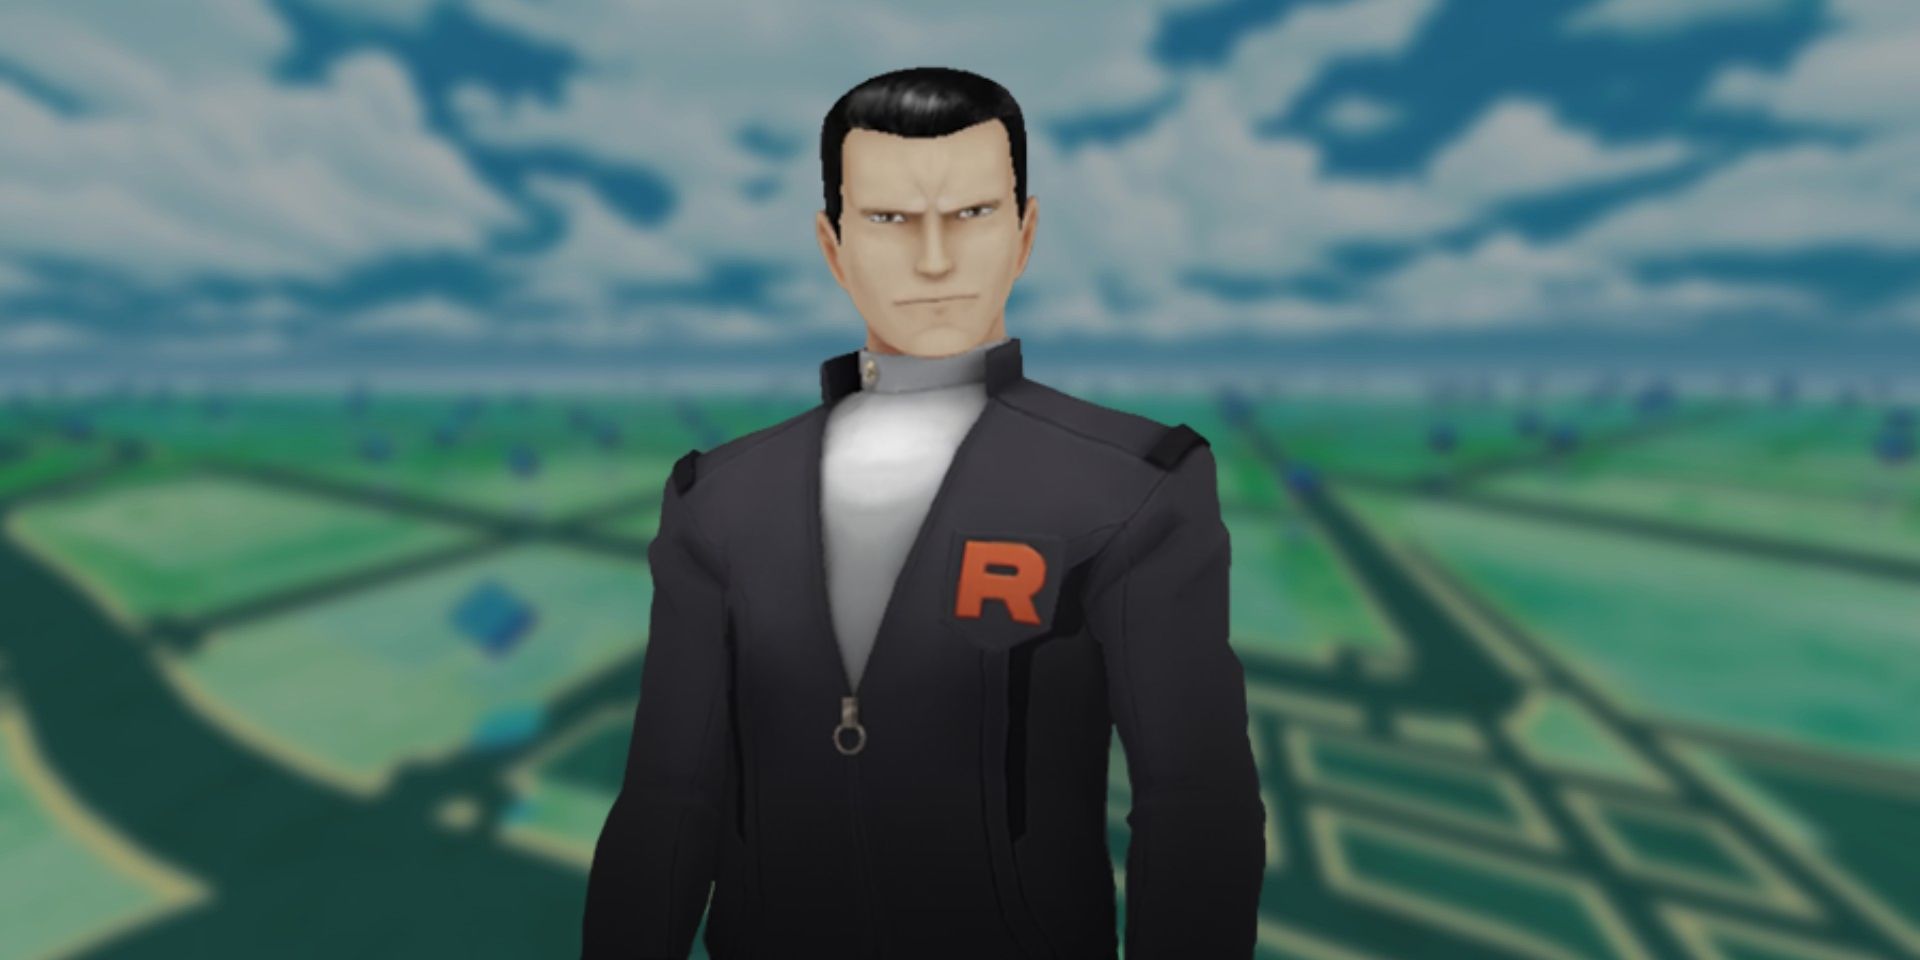 Pokemon GO's Team GO Rocket Boss Giovanni and the blurred-out Pokémon GO map in the background.